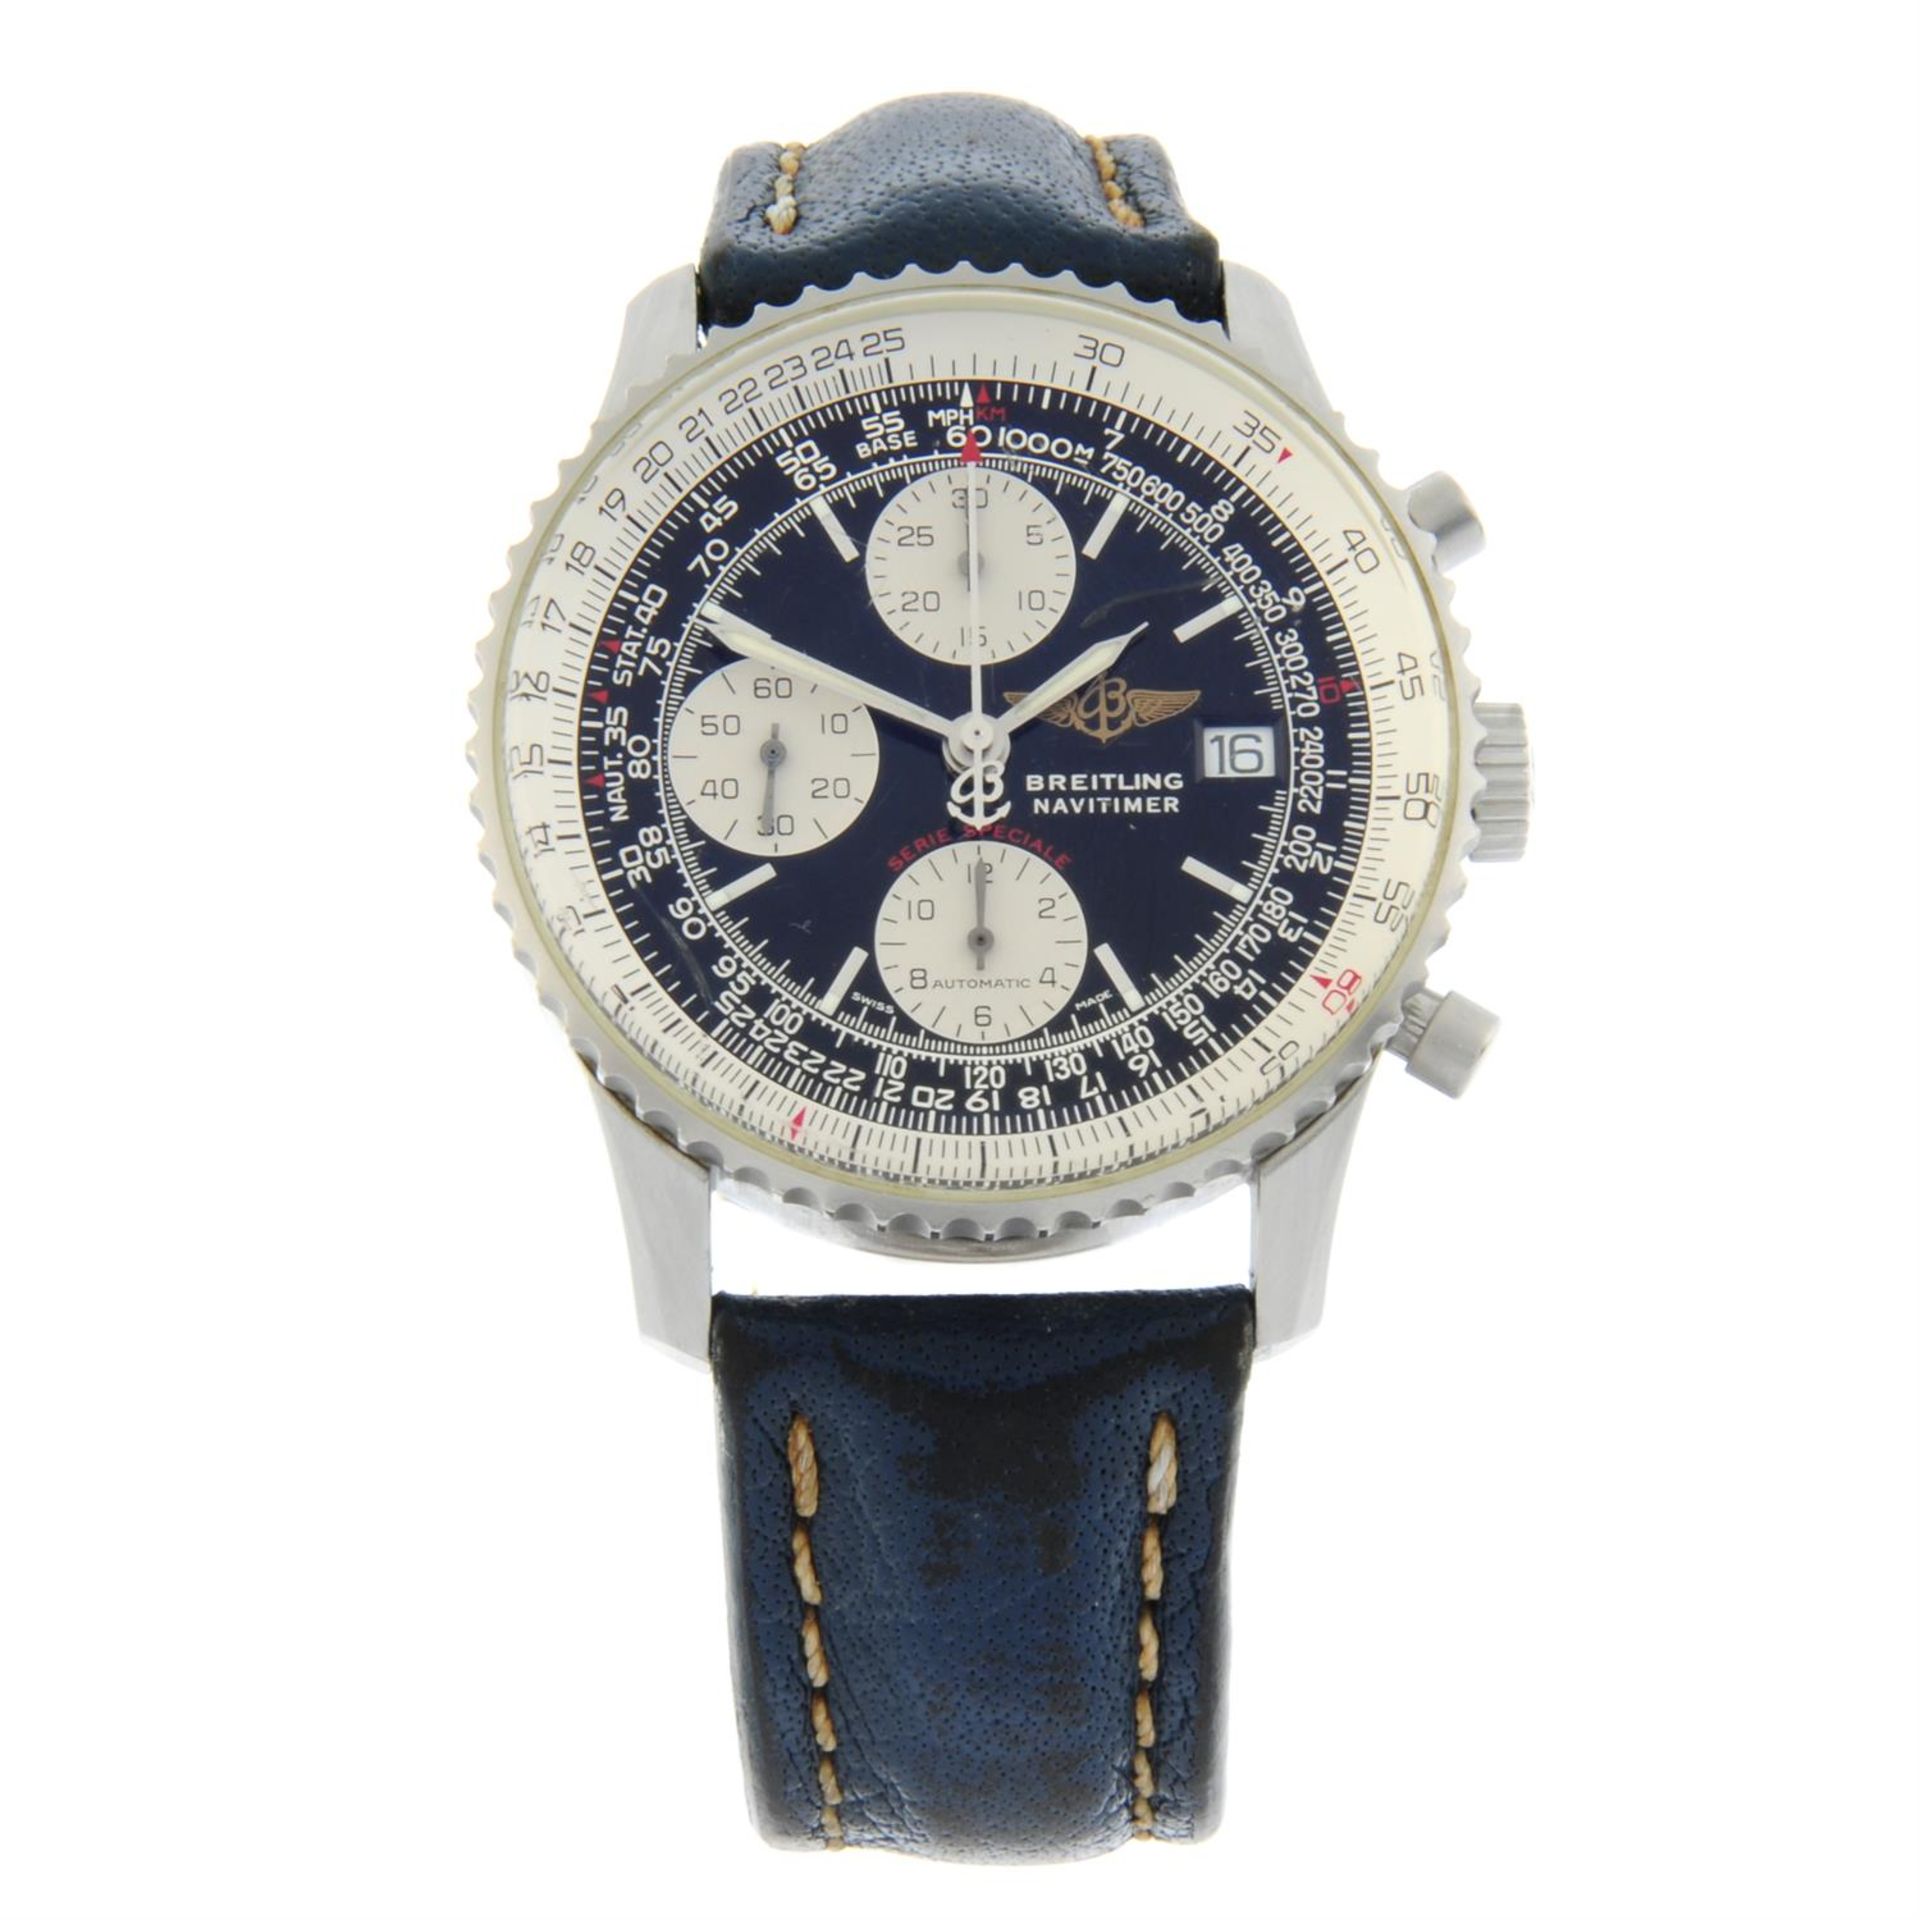 Breitling - a Navitimer Fighters watch, 41.5mm.